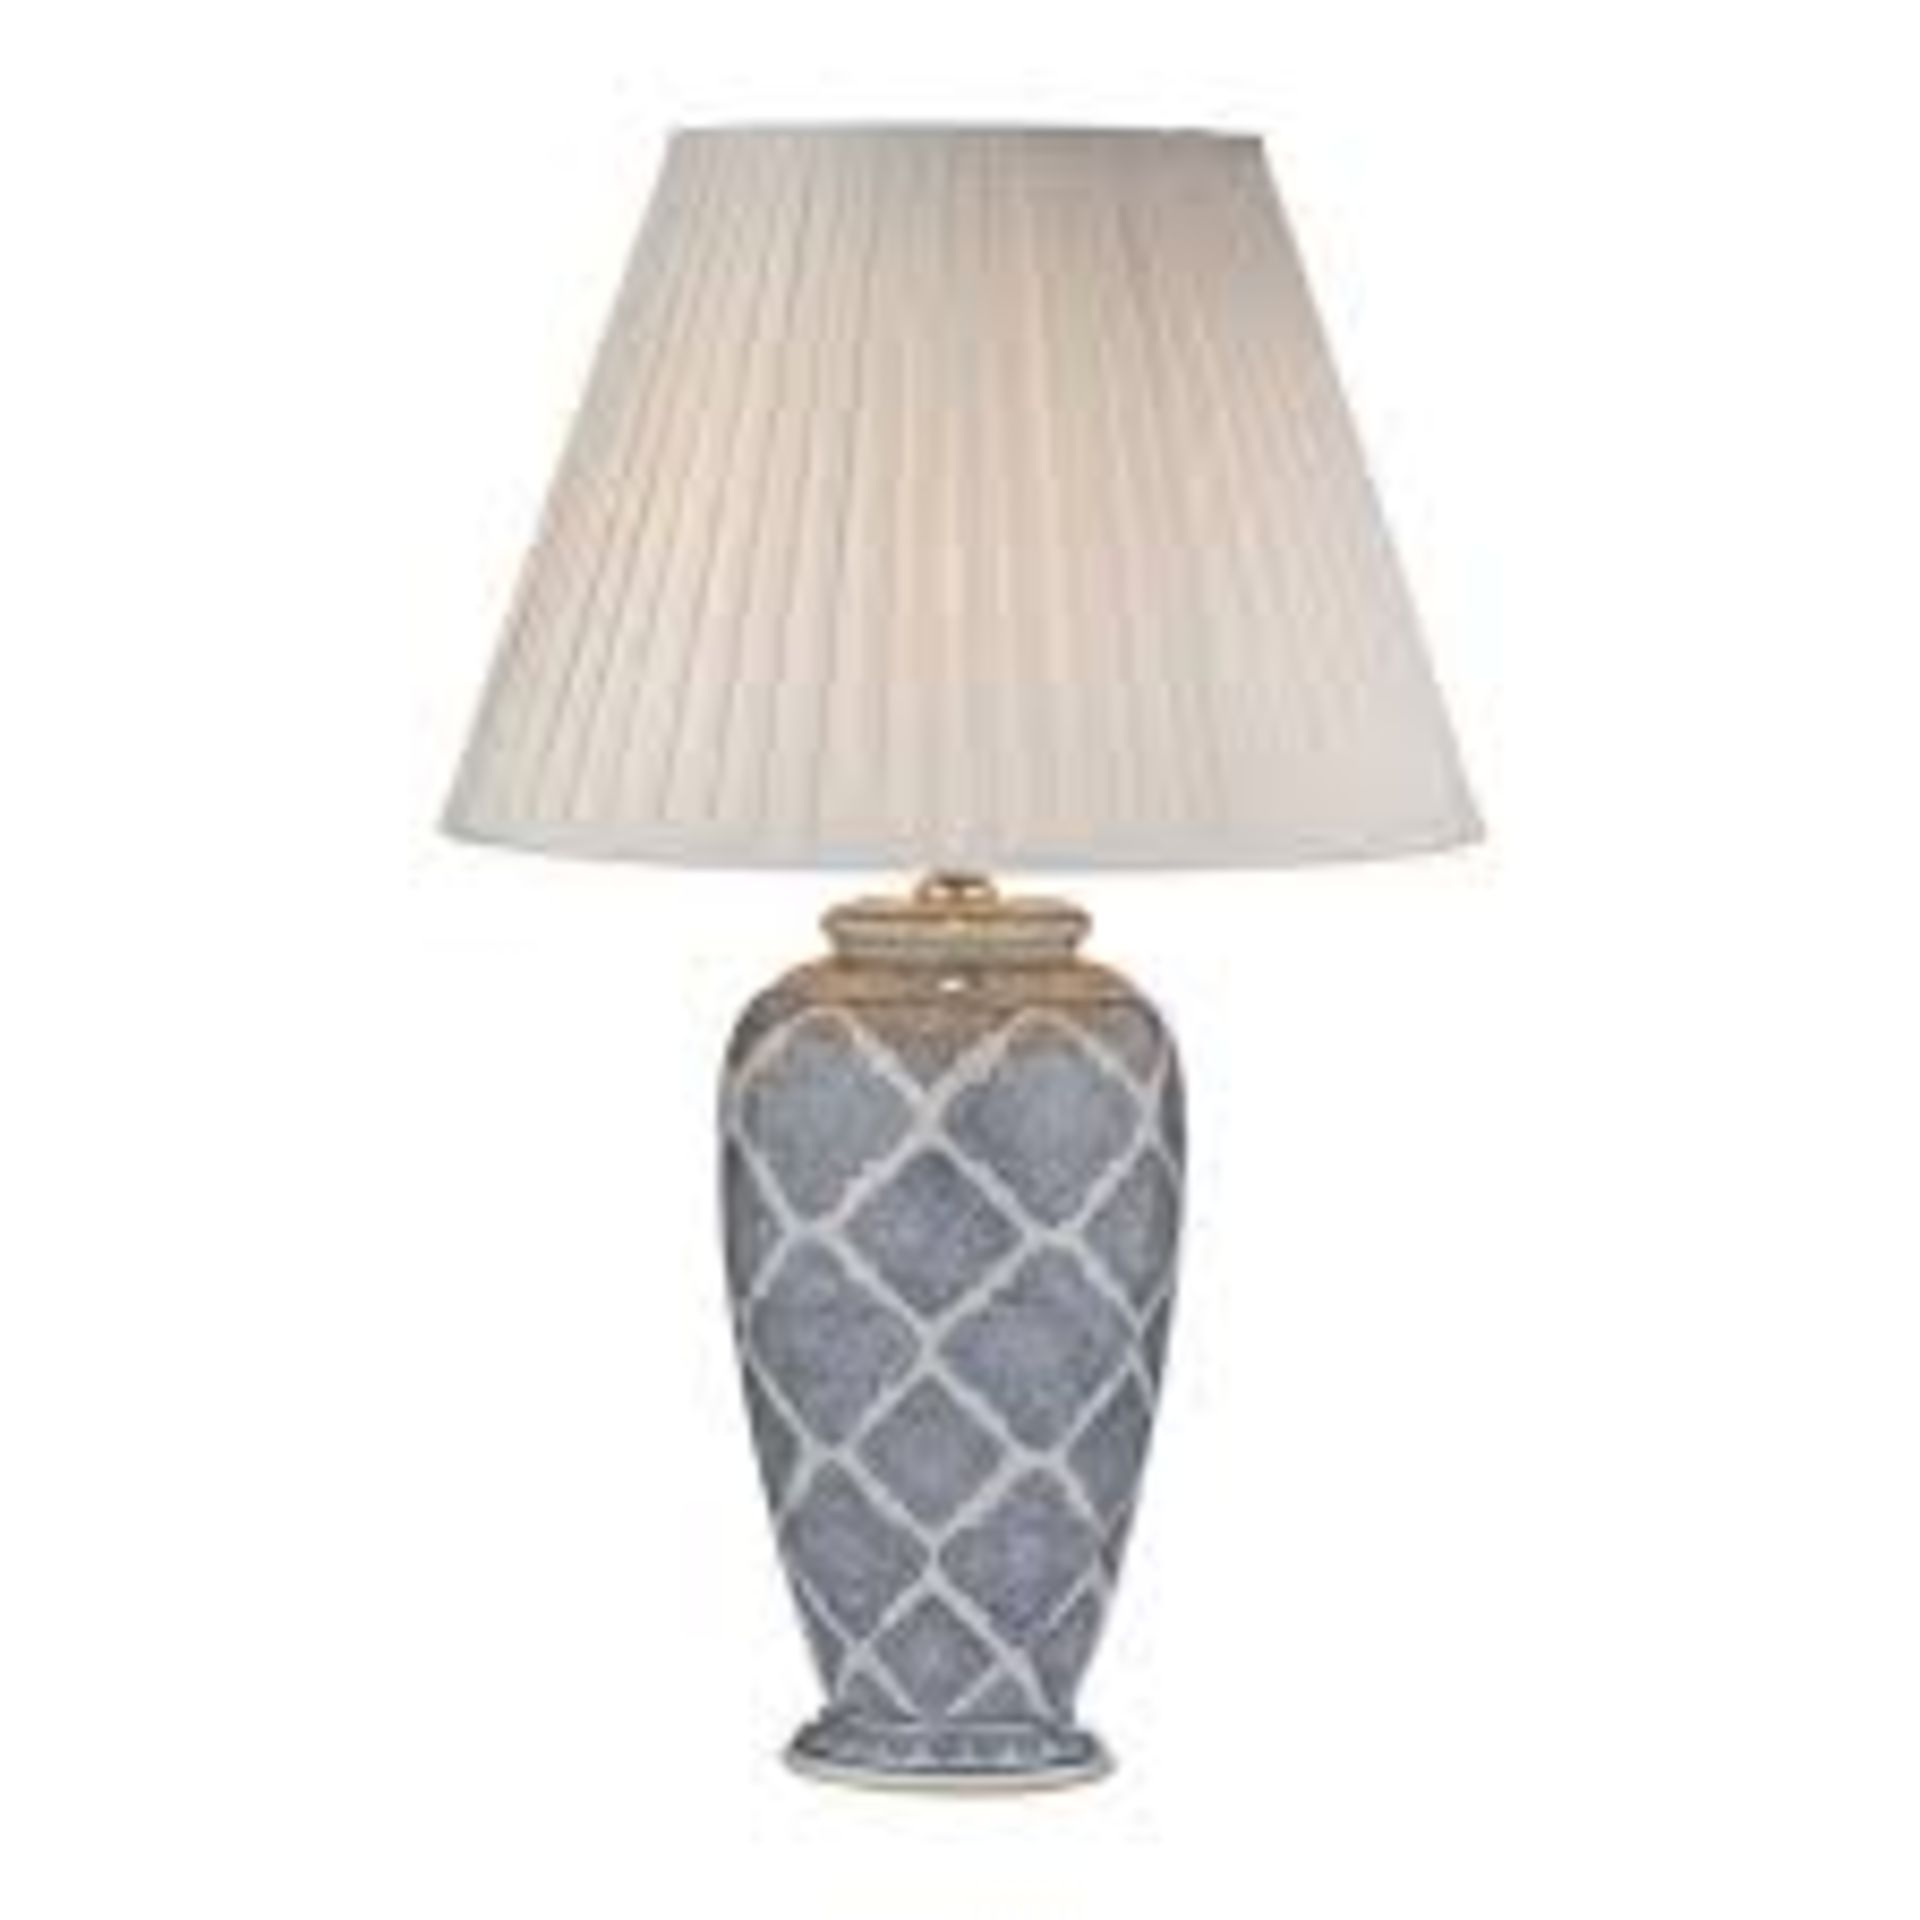 Boxed Darr Lighting Ely Blue And White Finish Table Lamp Base RRP £70 (9492) (Untested Customer